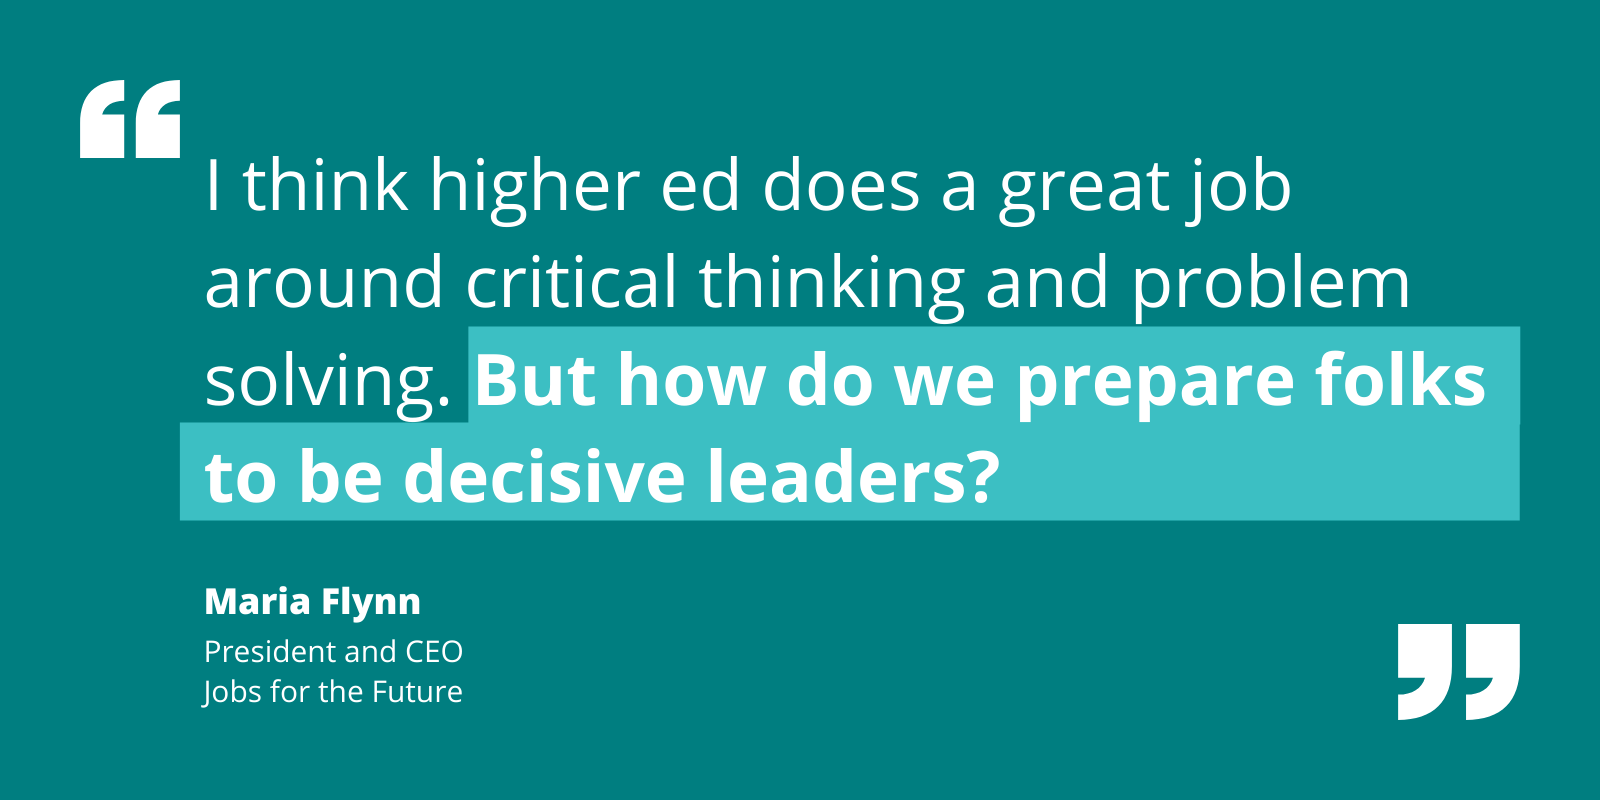 Quote by Maria Flynn re: whether critical thinking and problem solving prepare higher ed students to be decisive leaders.